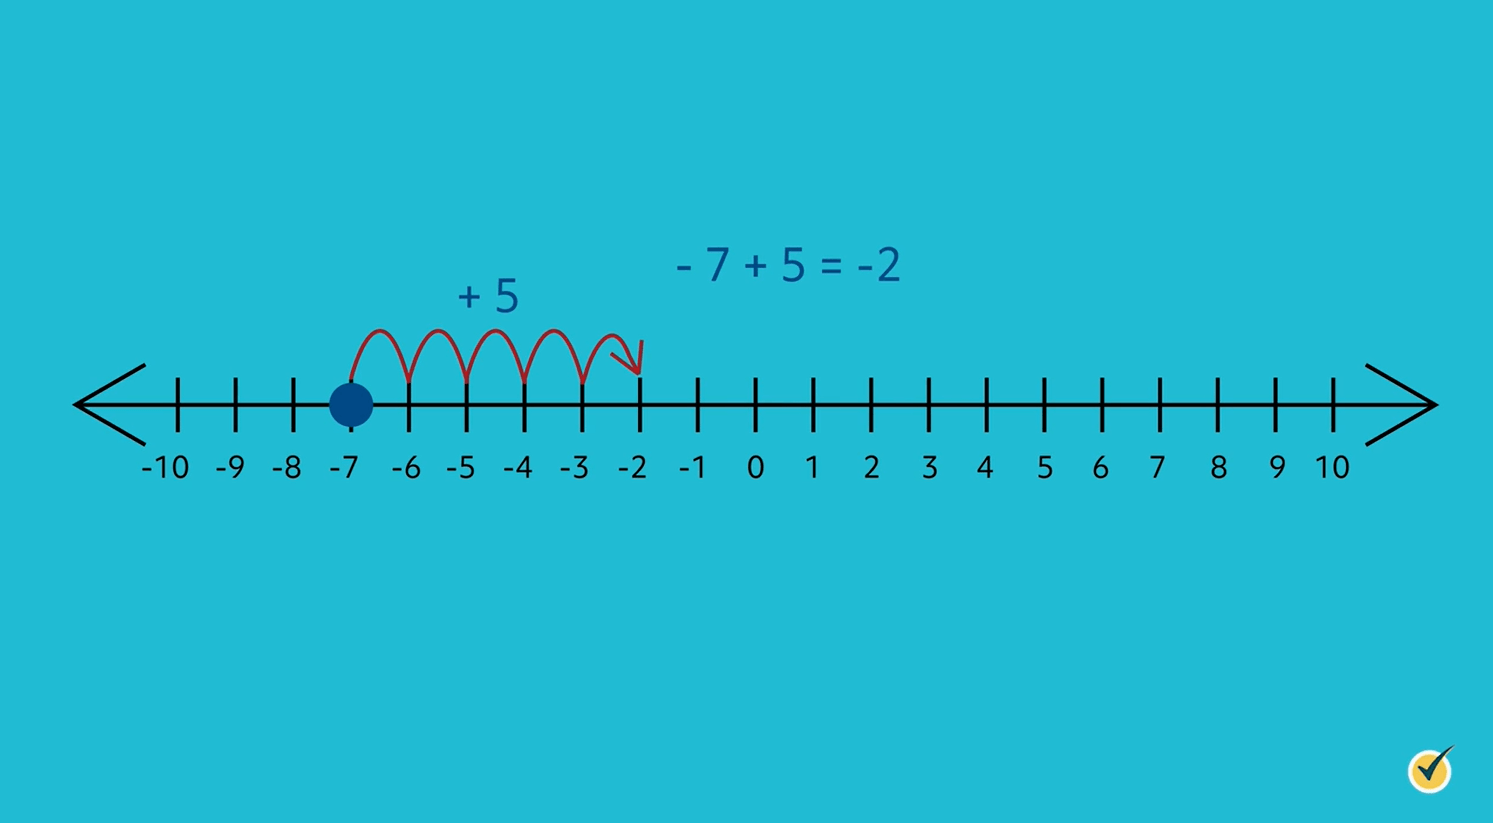 Number line with arrow pointing from -7 to -2